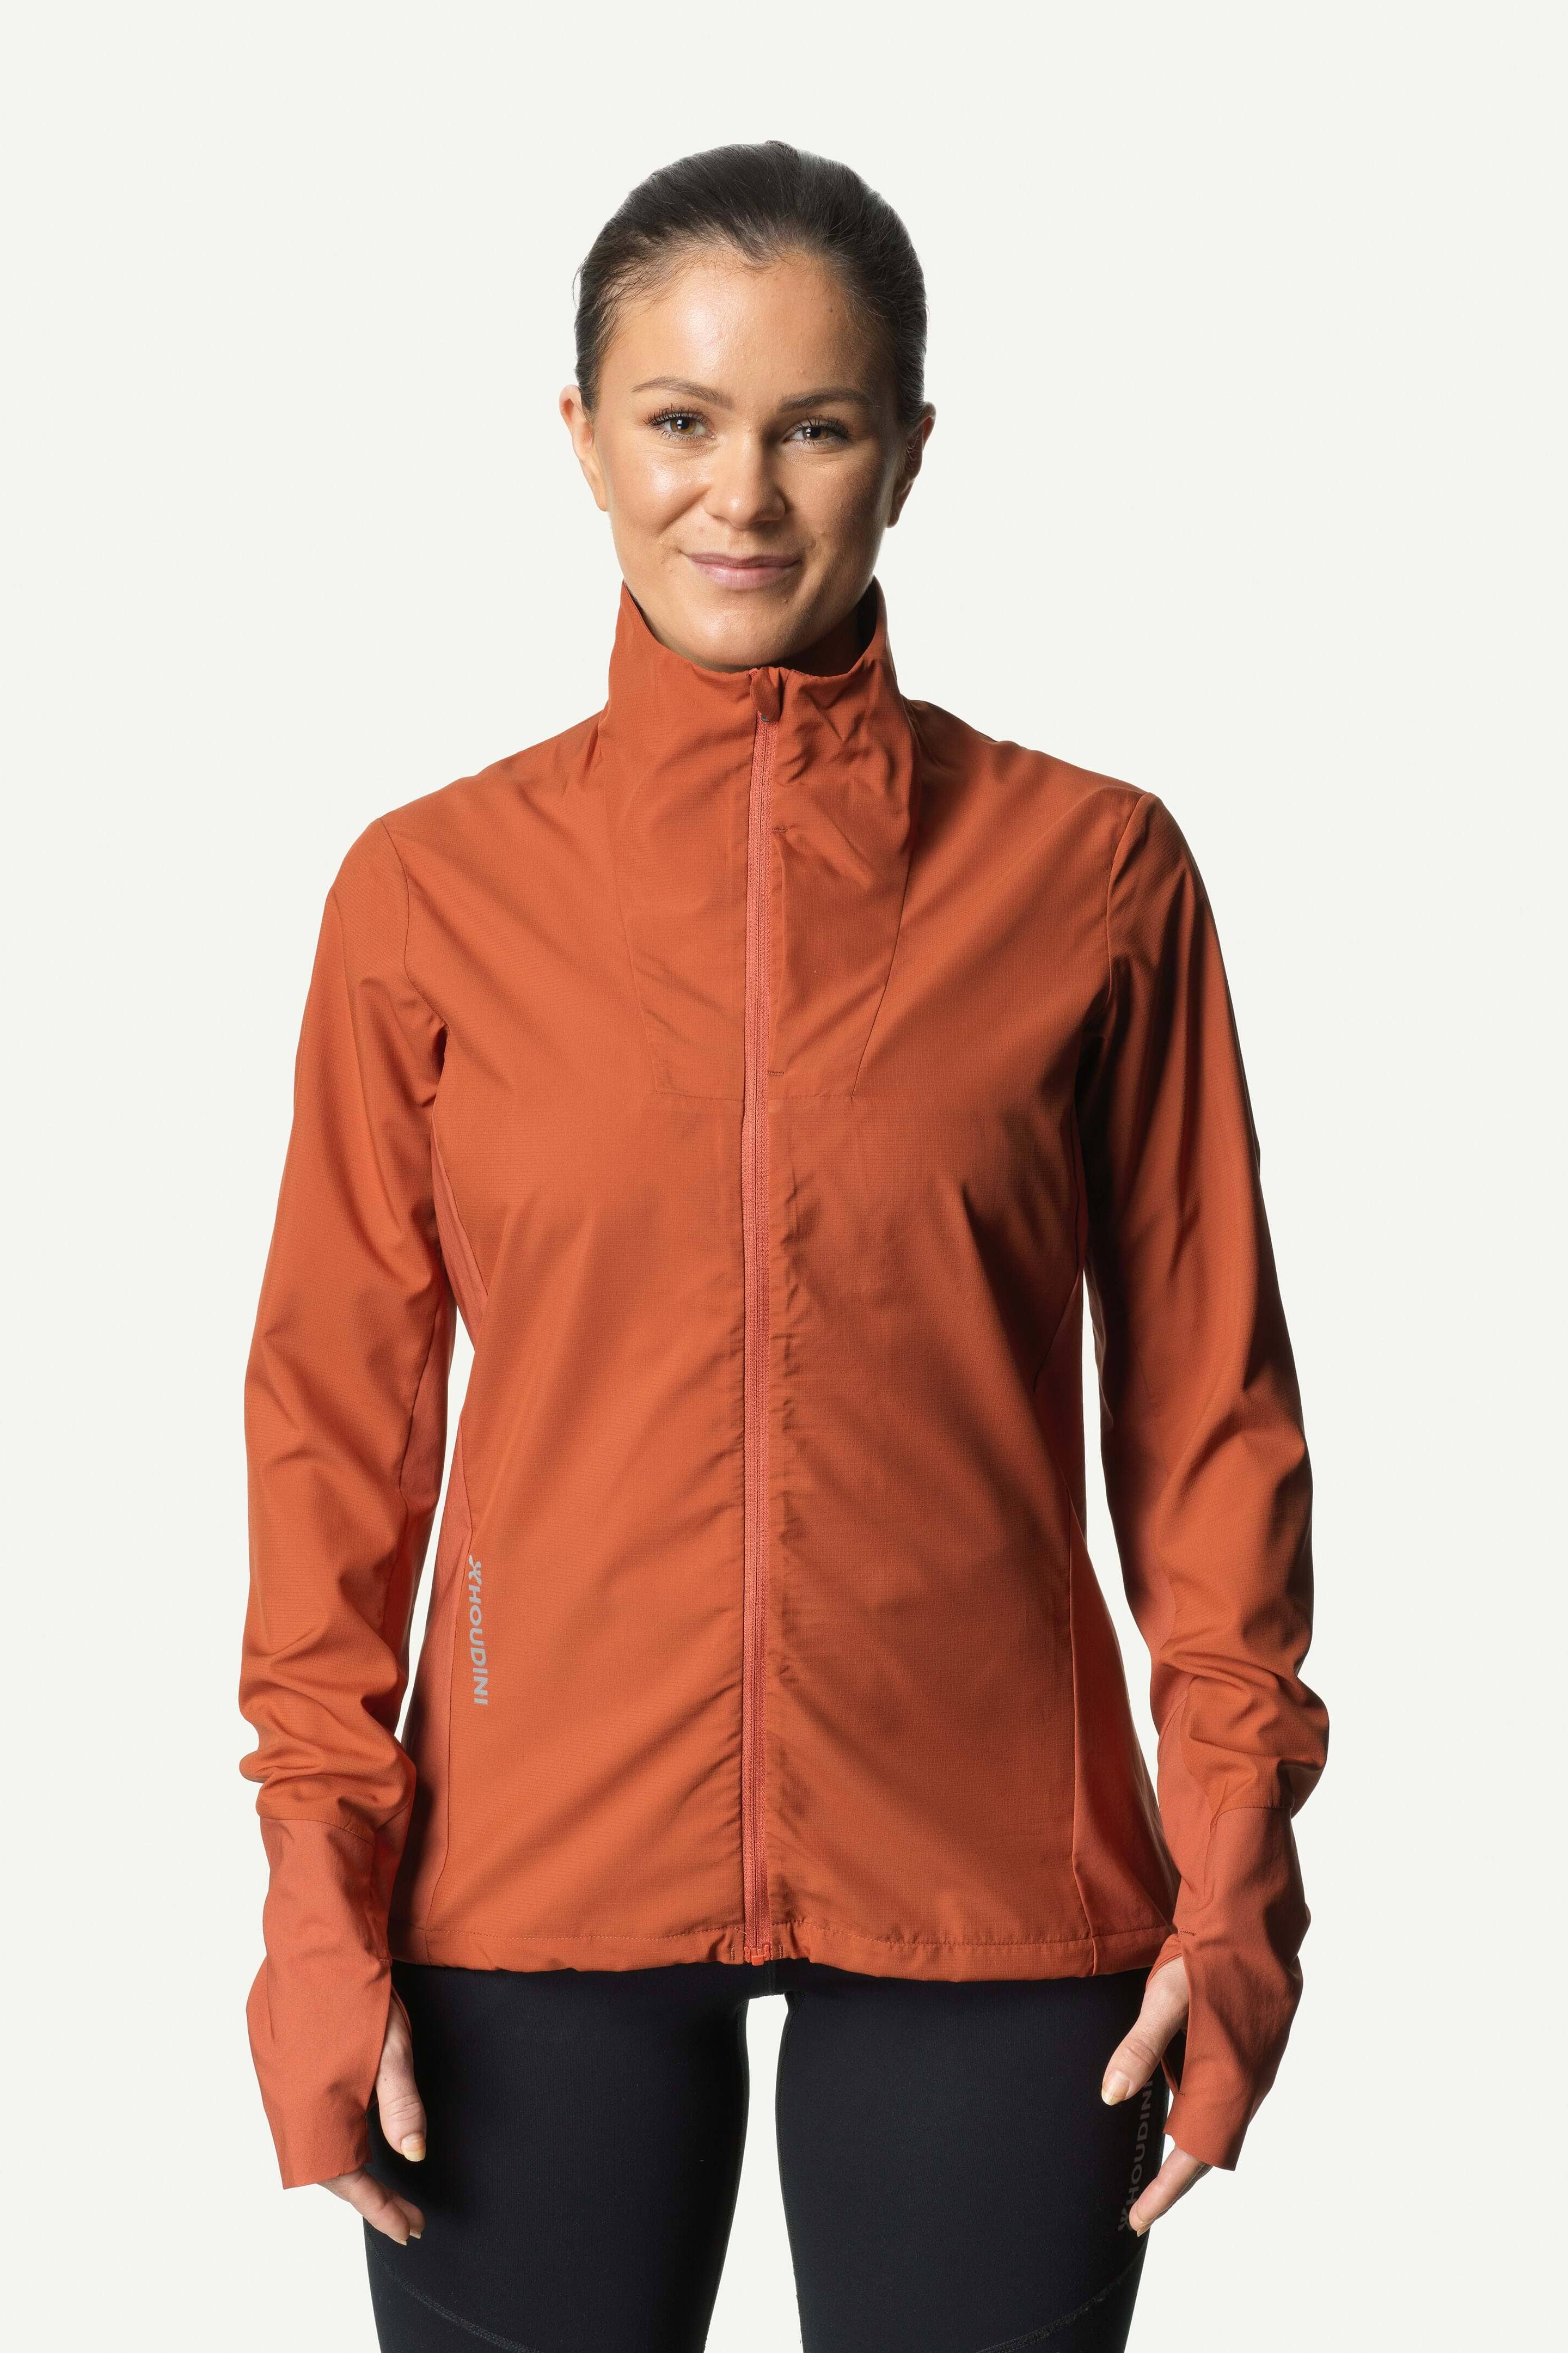 Houdini W's Pace Wind Jacket - 100% recycled polyester